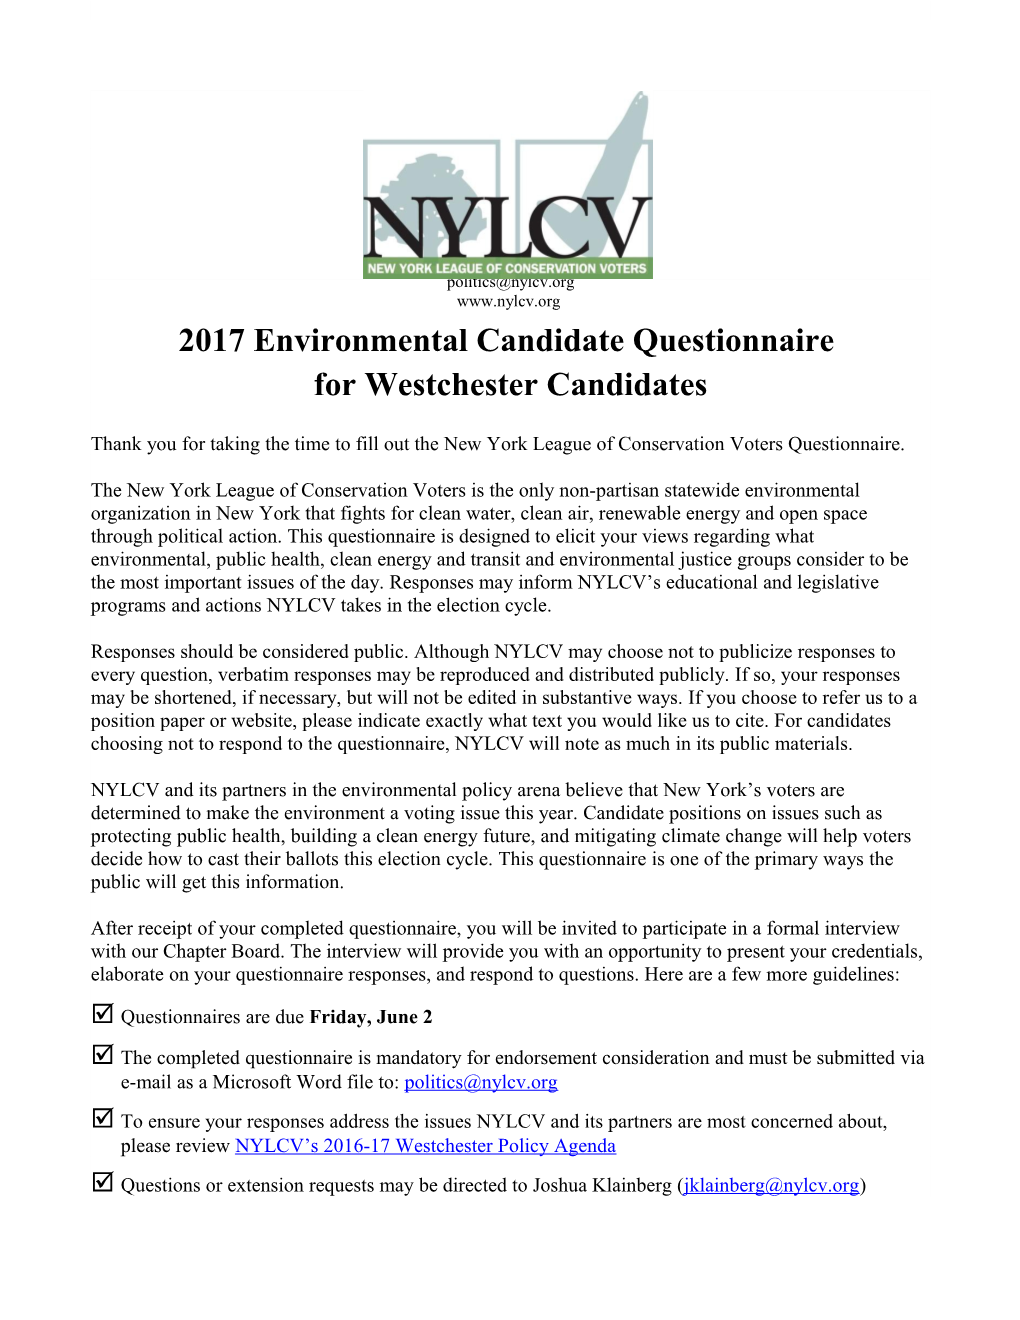 2017 Environmental Candidate Questionnaire for Westchester Candidates